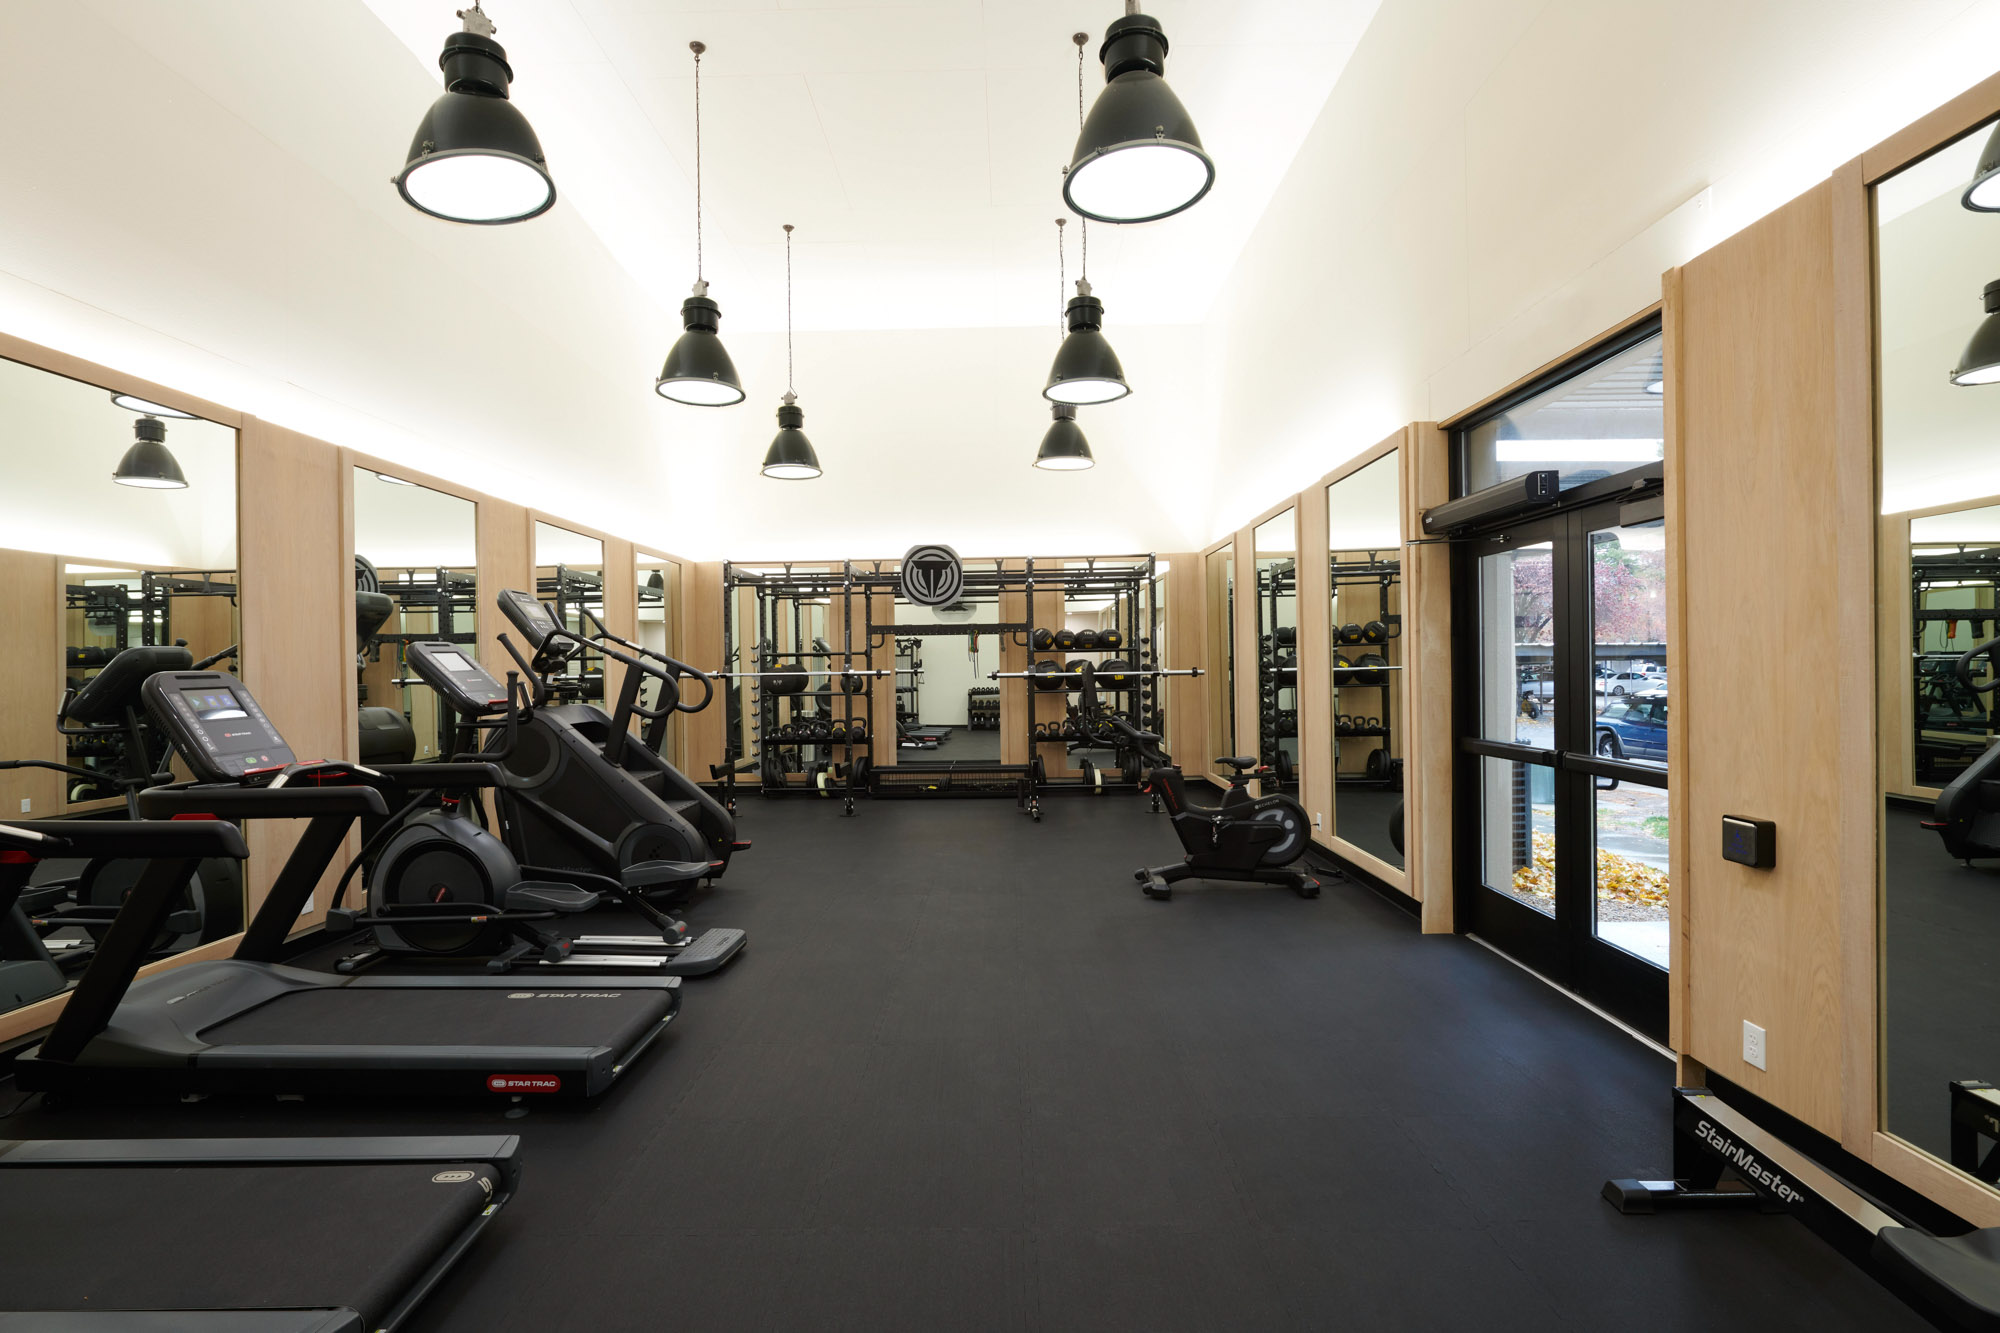 The fitness center at Stillwater apartments in Murray, Utah.